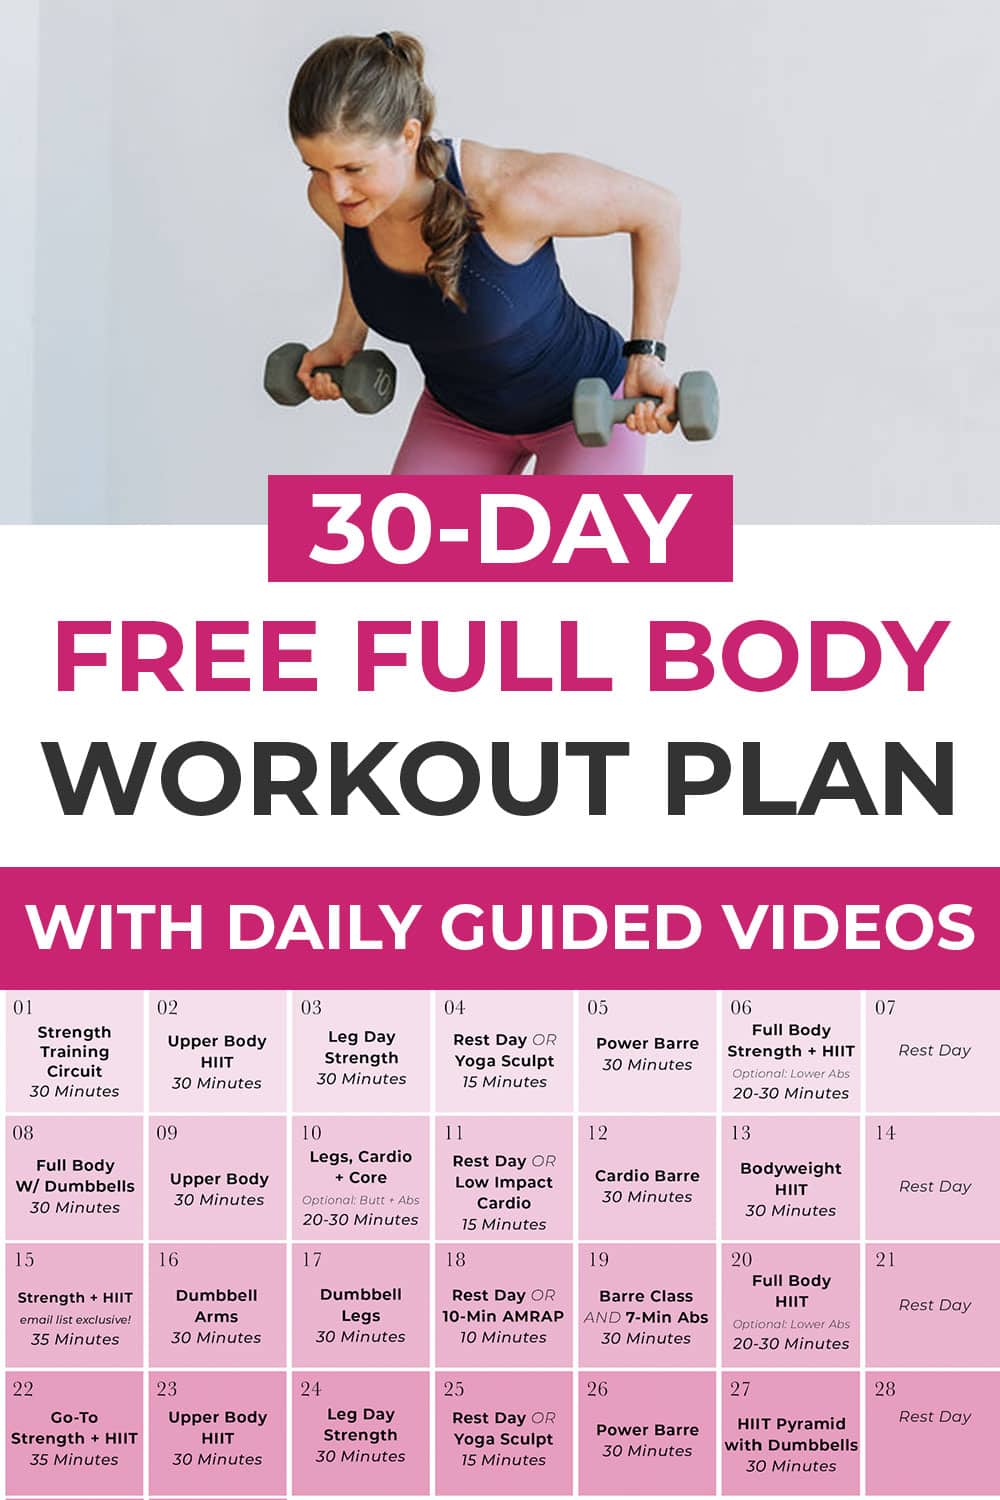 3-amazing-30-day-fitness-challenge-to-spice-up-home-workouts